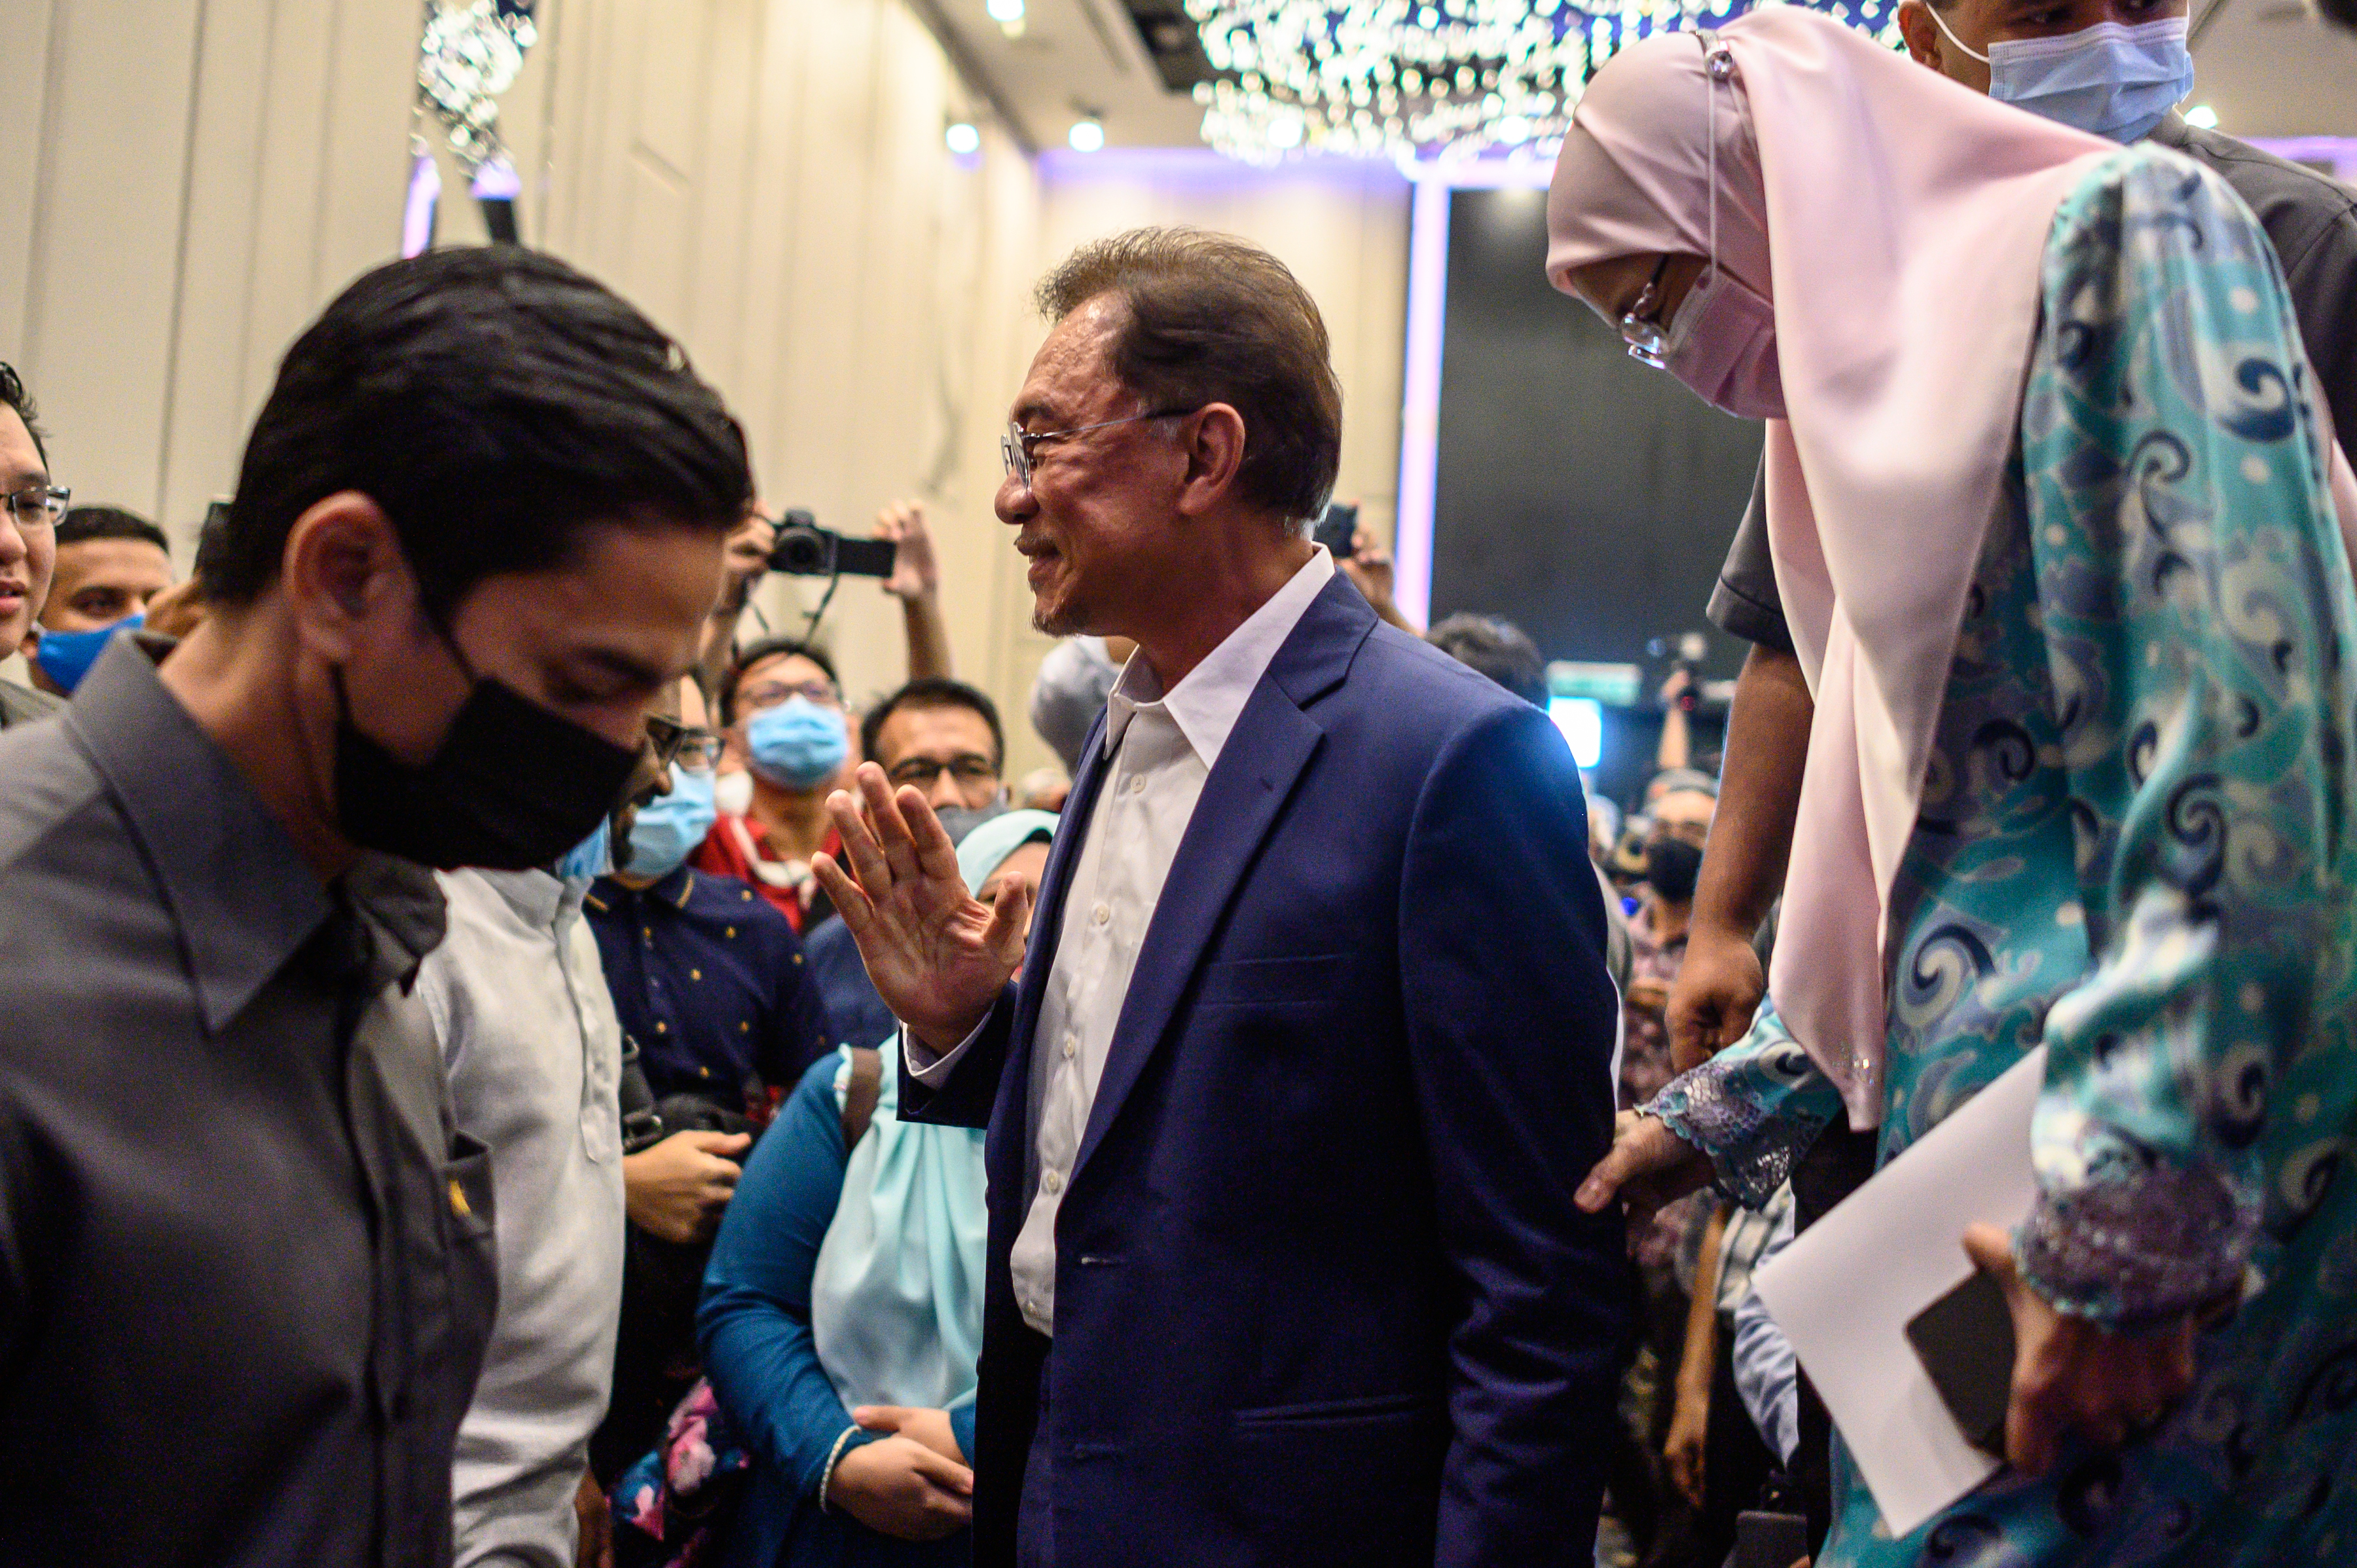 Malaysian opposition leader Anwar Ibrahim (C) and his wife Wan Azizah Wan Ismail (R) leave after a press conference at a hotel in Kuala Lumpur on September 23, 2020. (Photo by Mohd RASFAN / AFP)